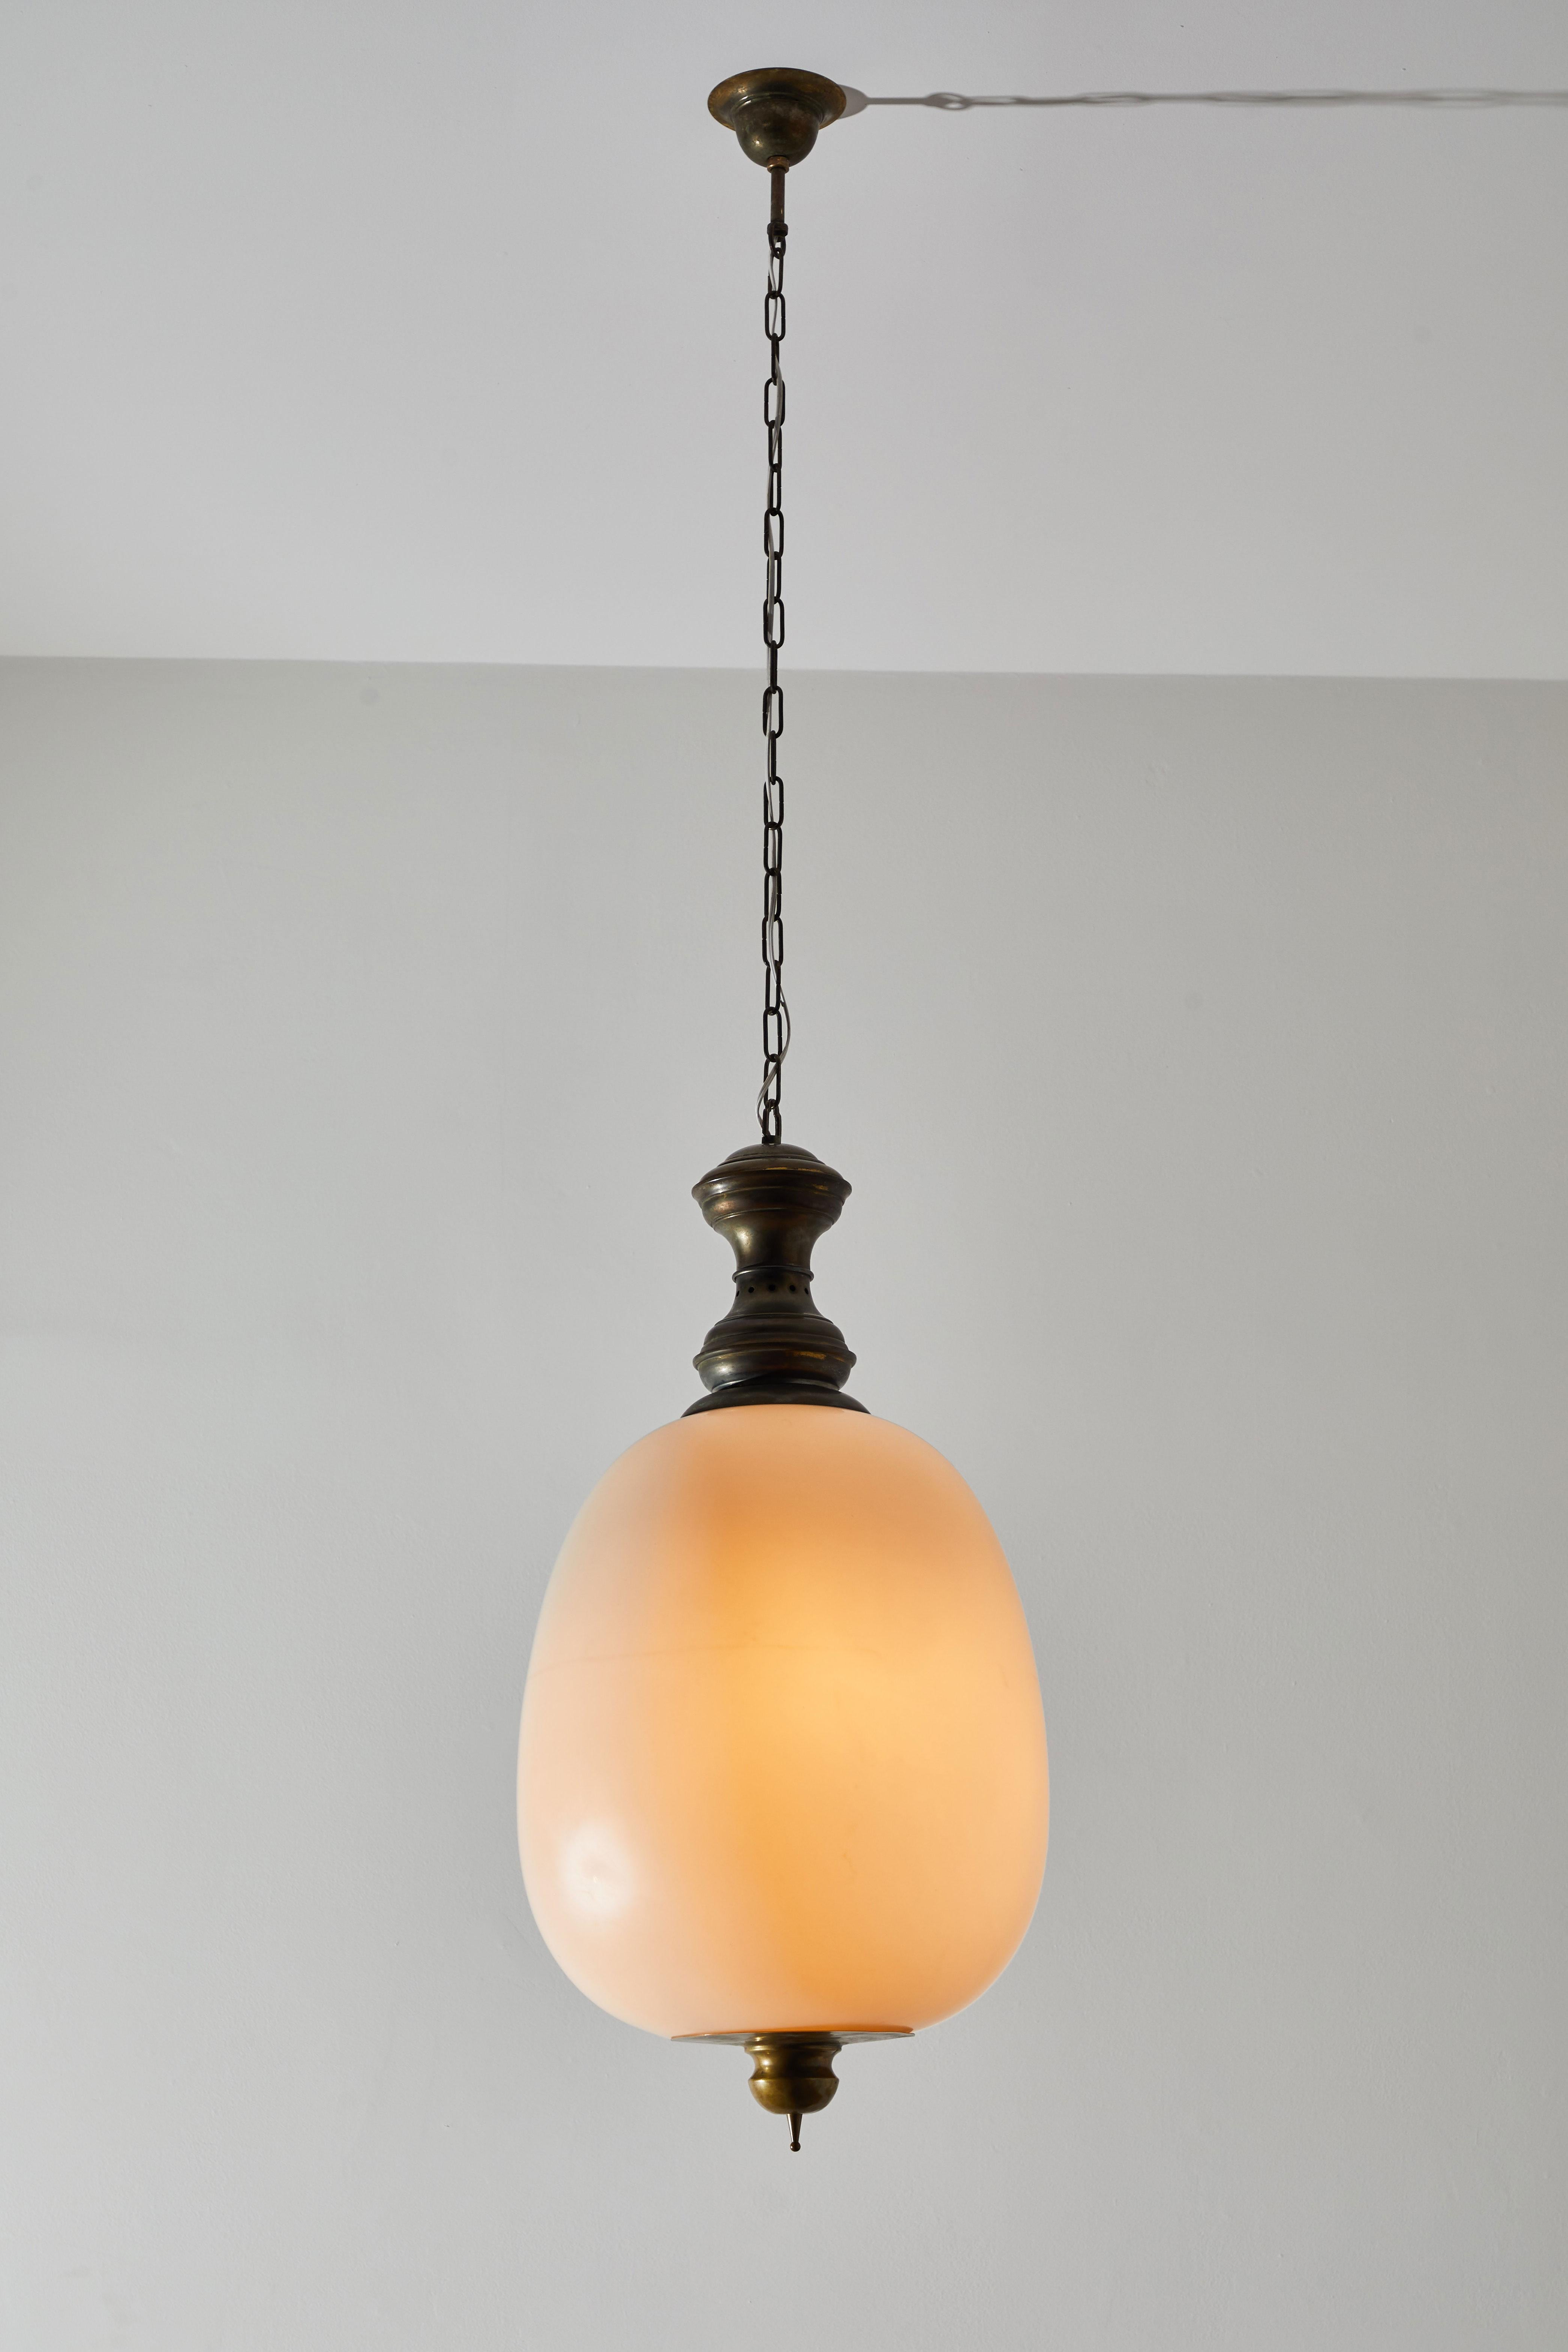 Single monumental pendant by Caccia Dominioni for Azucena. Designed and manufactured in Italy circa 1950s. Brass with brushed satin glass diffusers. Rewired for US junction boxes. Custom brass ceiling plate. Takes three E27 60w maximum Edison bulbs.